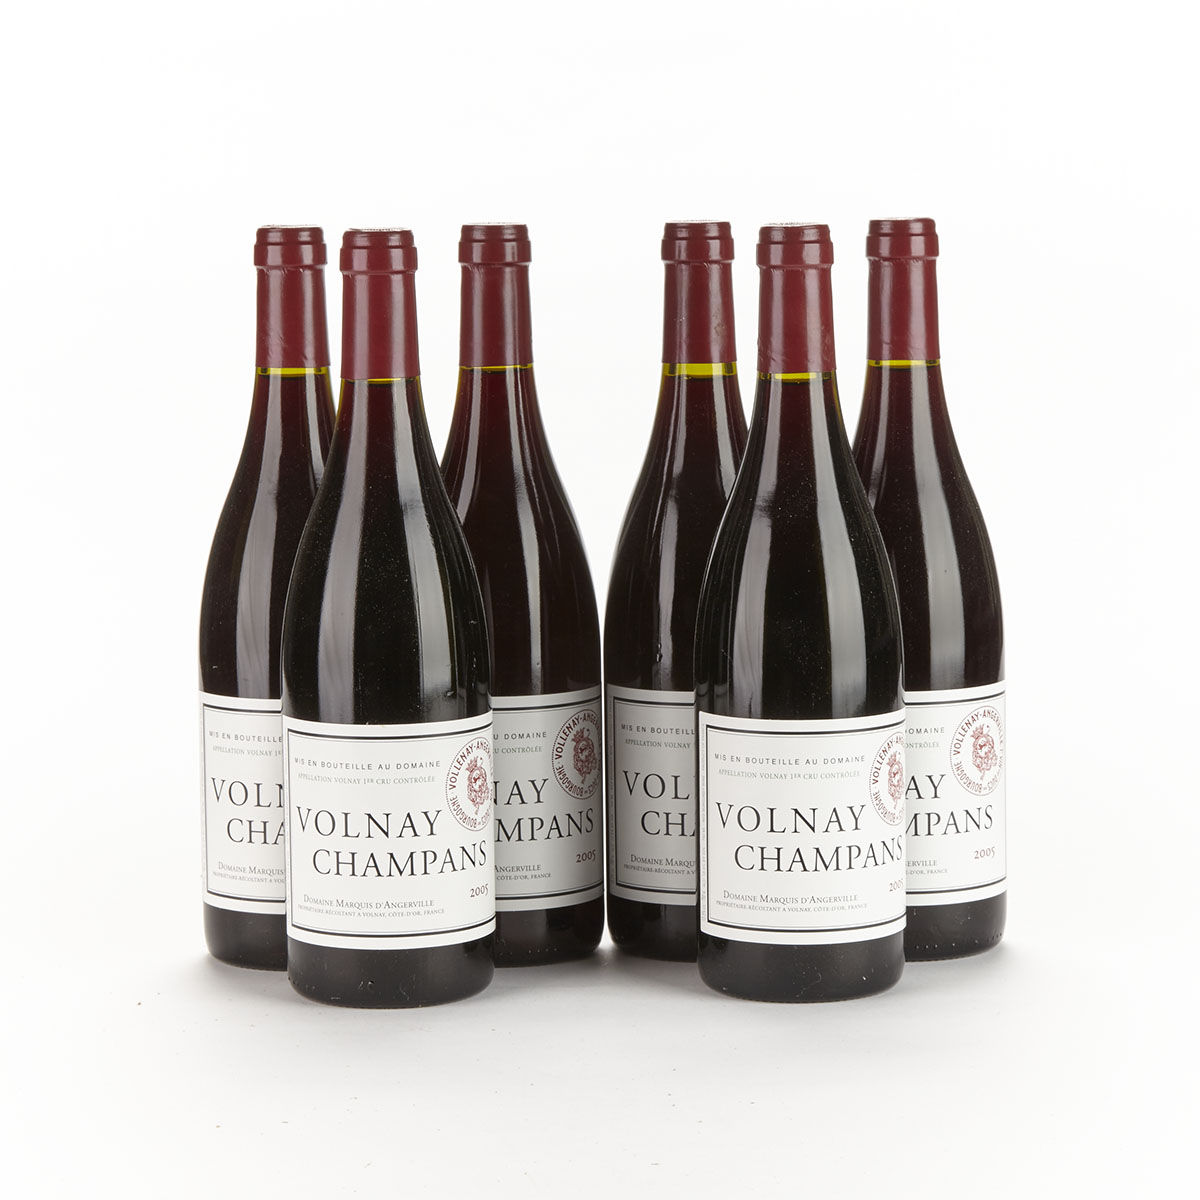 MARQUIS D’ANGERVILLE VOLNAY CHAMPANS 2005